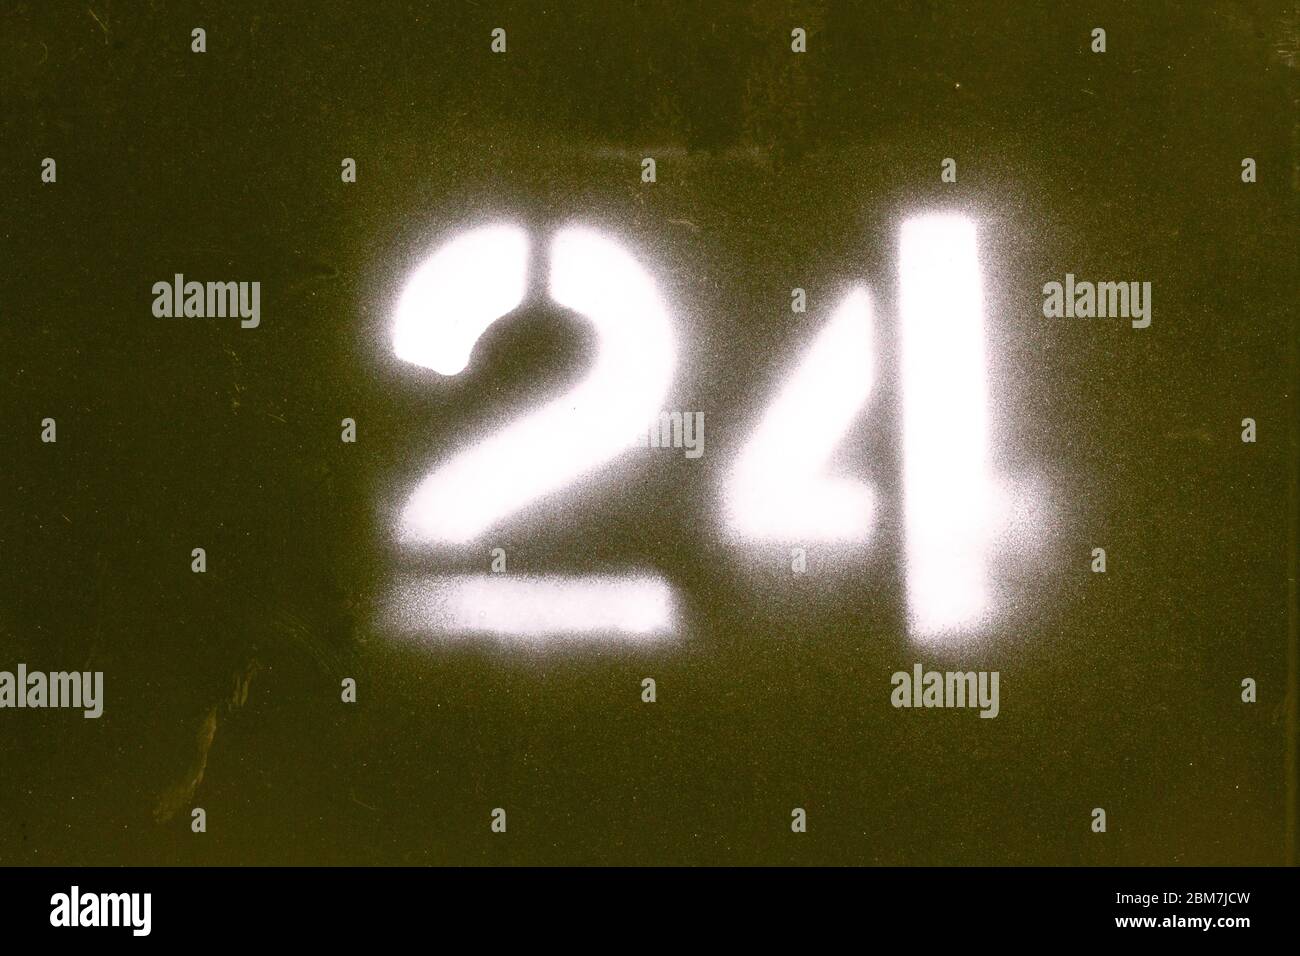 24 sprayed onto a dark green background in military style just like the army Stock Photo